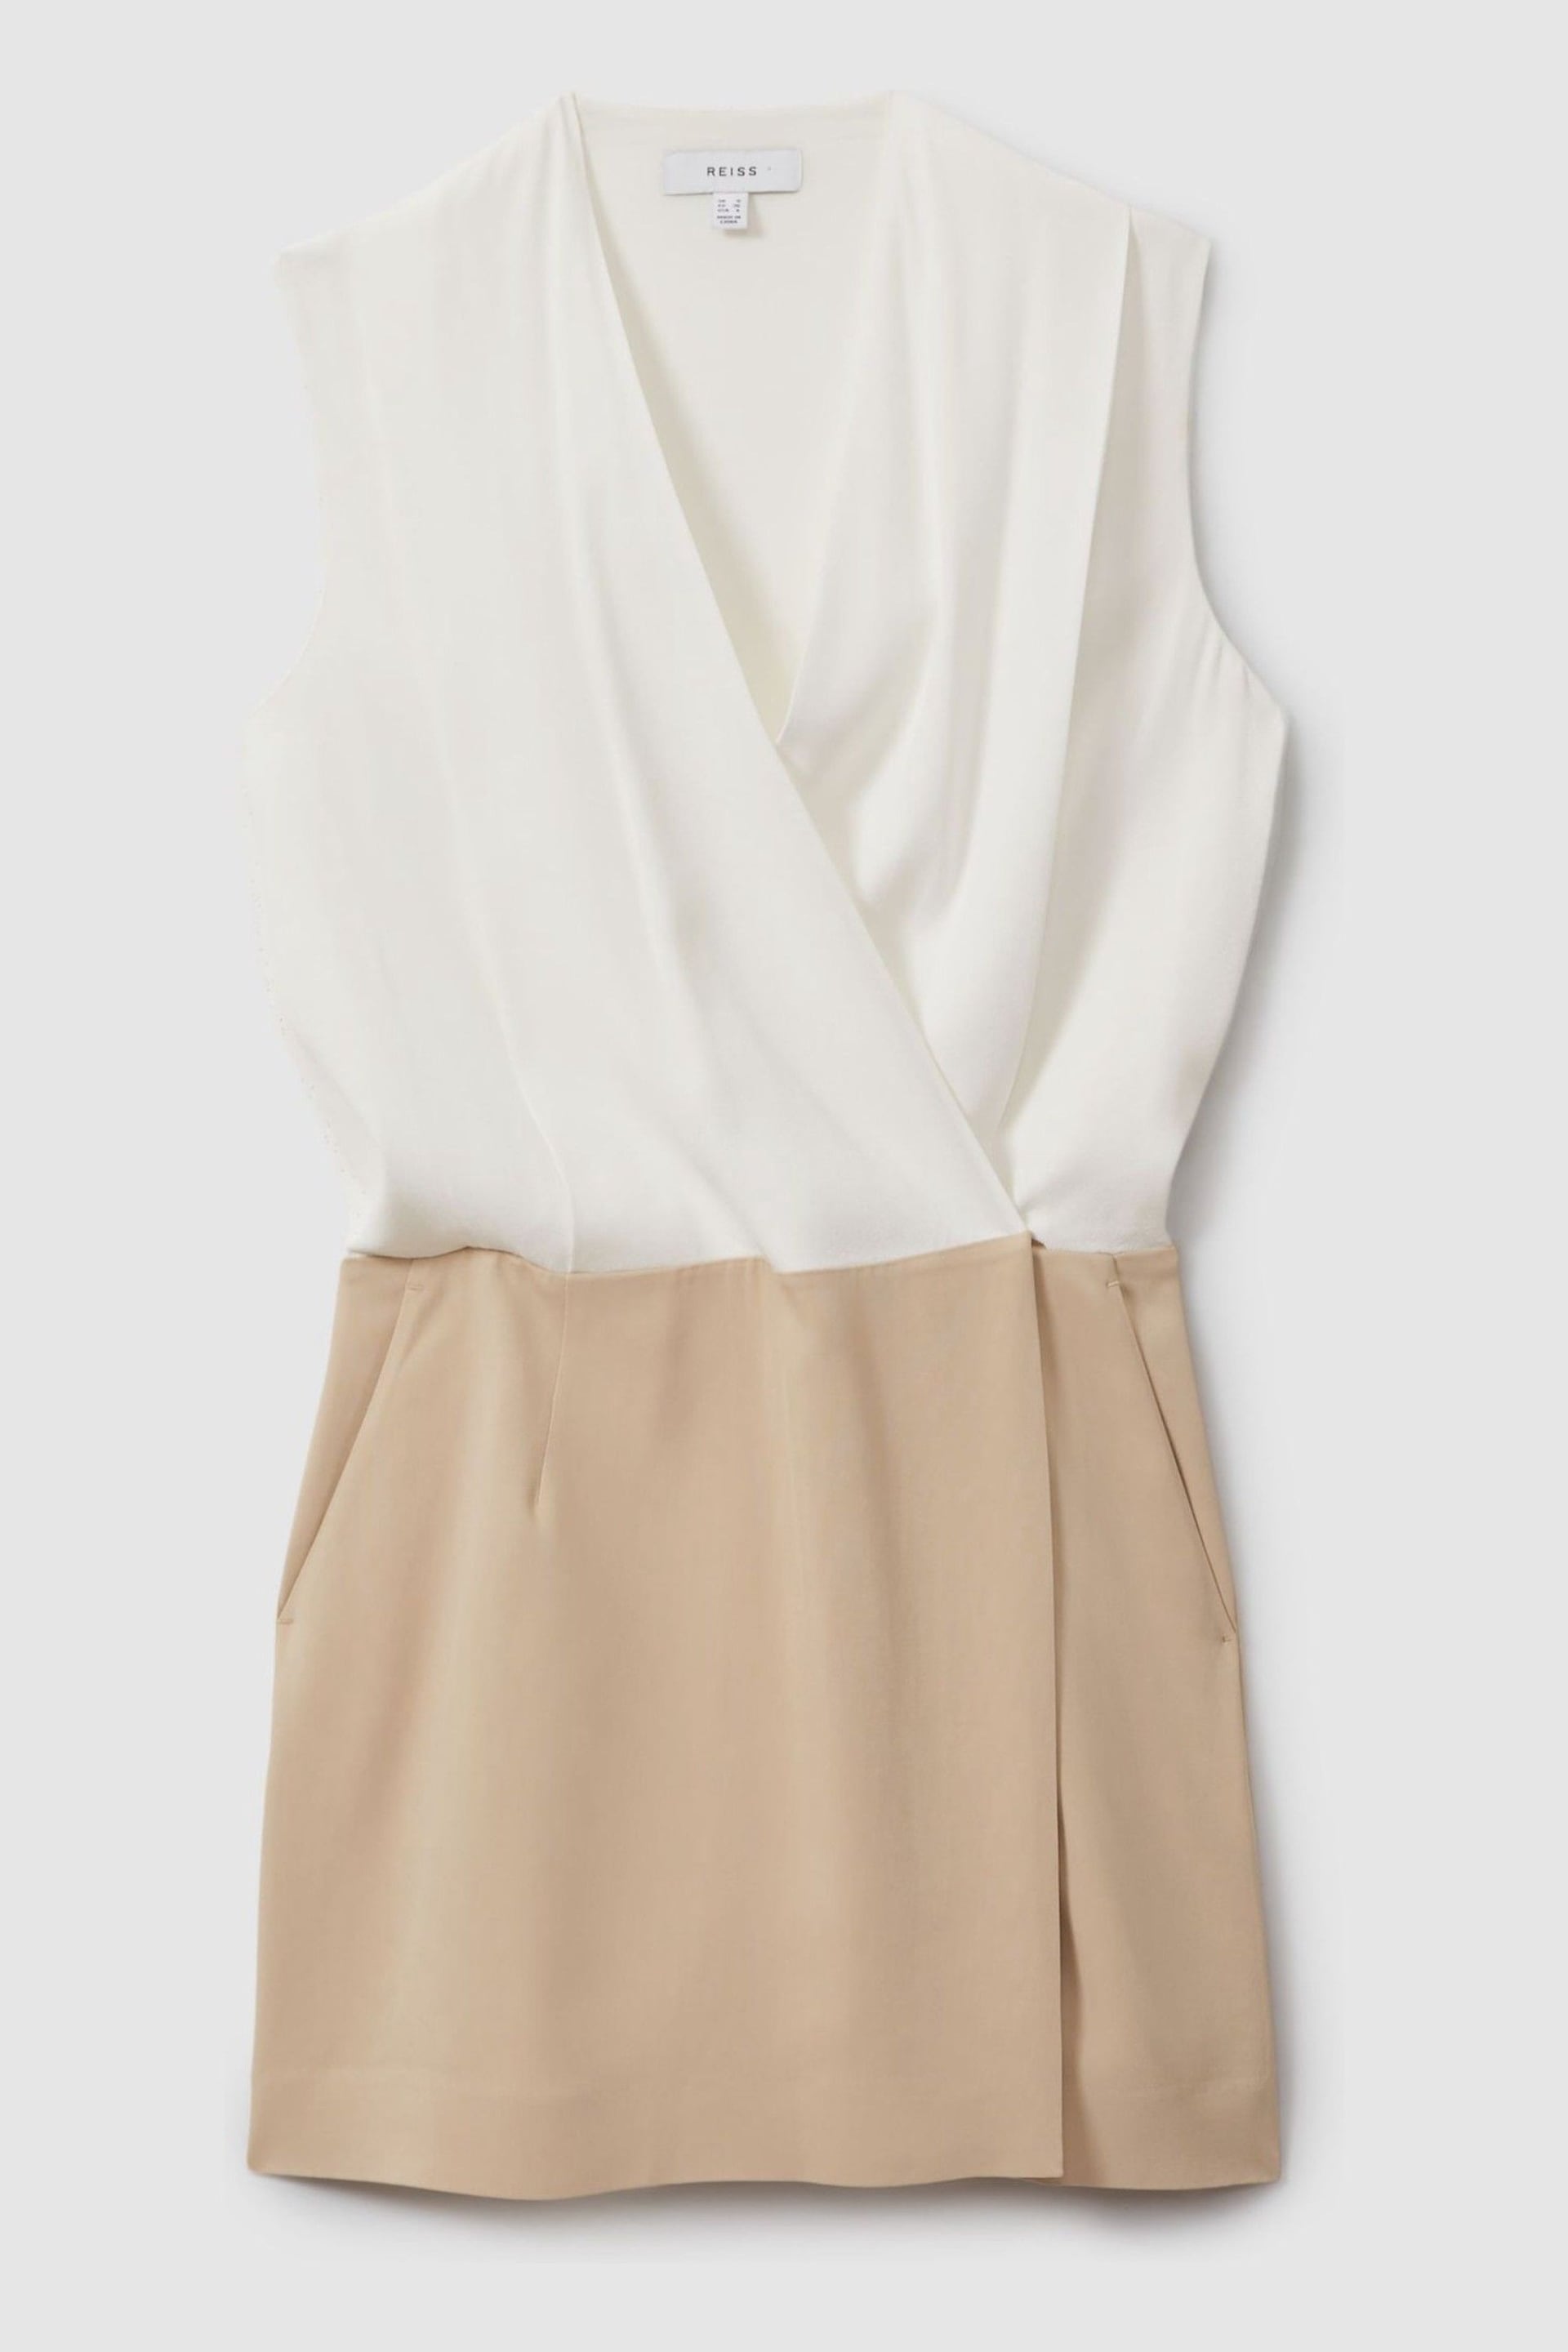 Reiss Nude/Ivory Vie Wrap-Front Shift Dress - Image 2 of 6